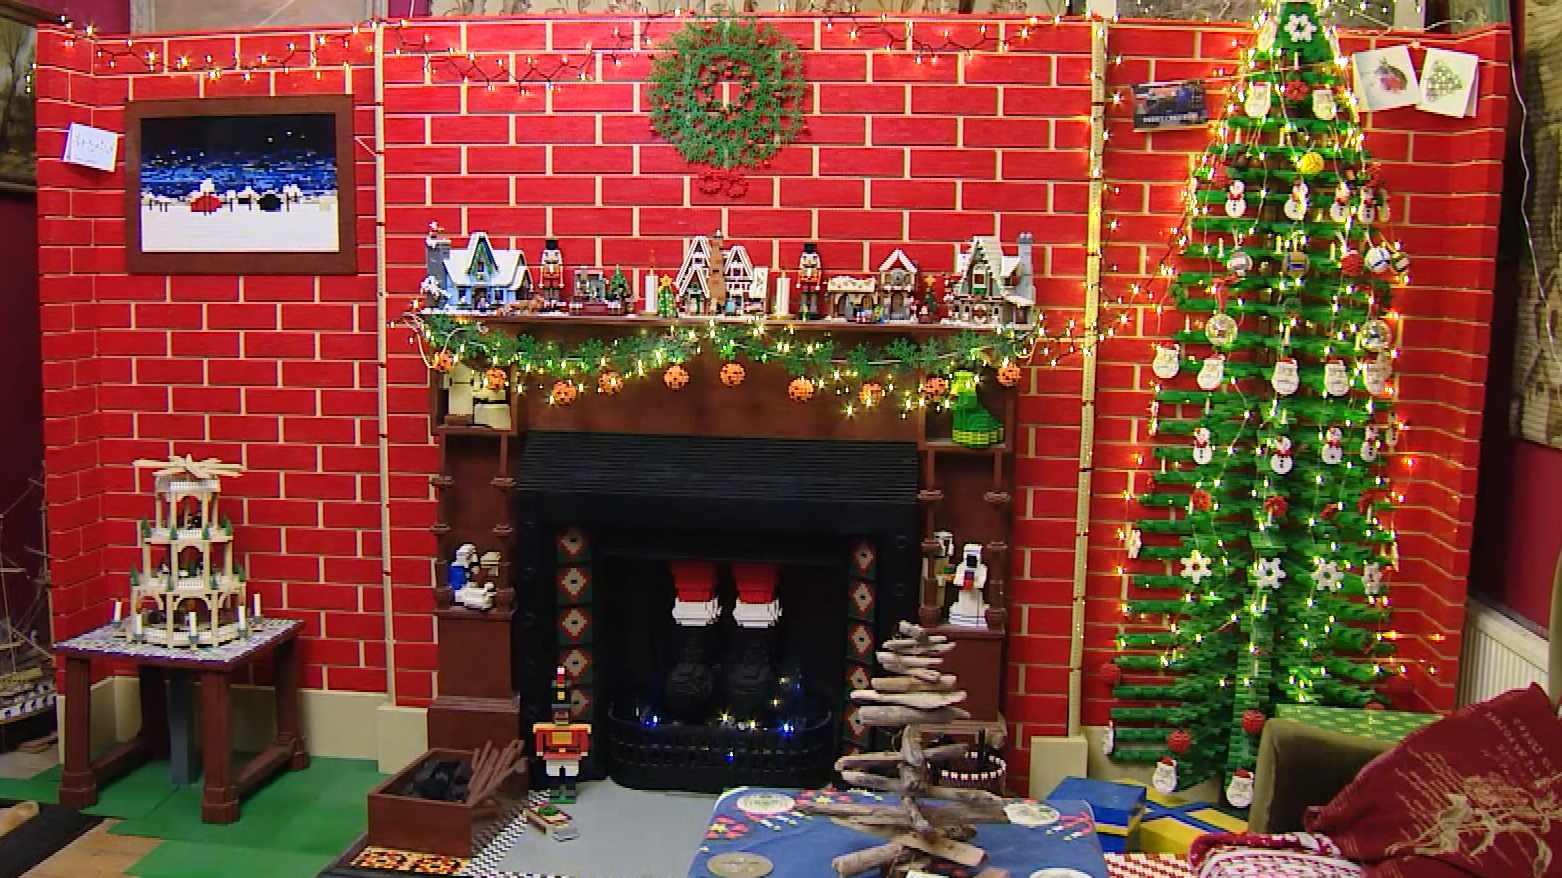 Lego-loving couple build a 12ft Lego Christmas wall complete with fireplace